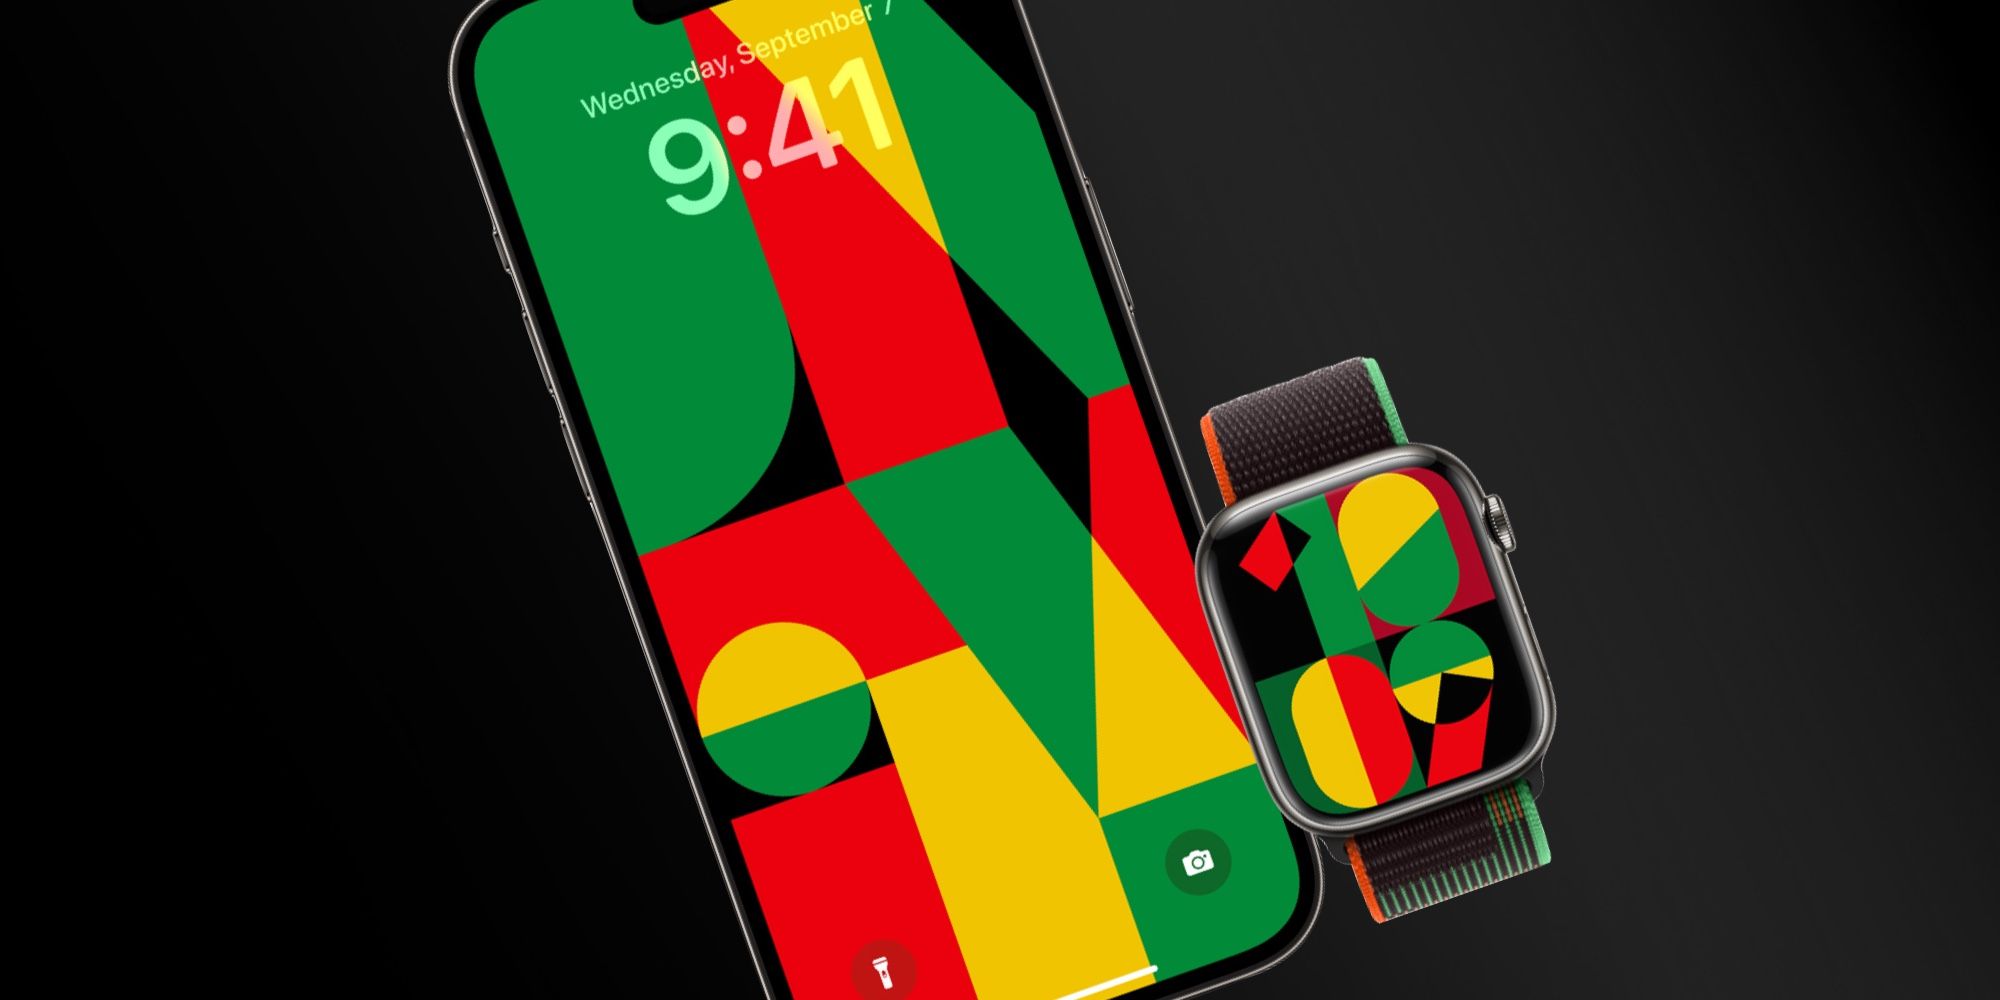 iPhone with Unity wallpaper next to Apple Watch with Unity Mosaic watch face